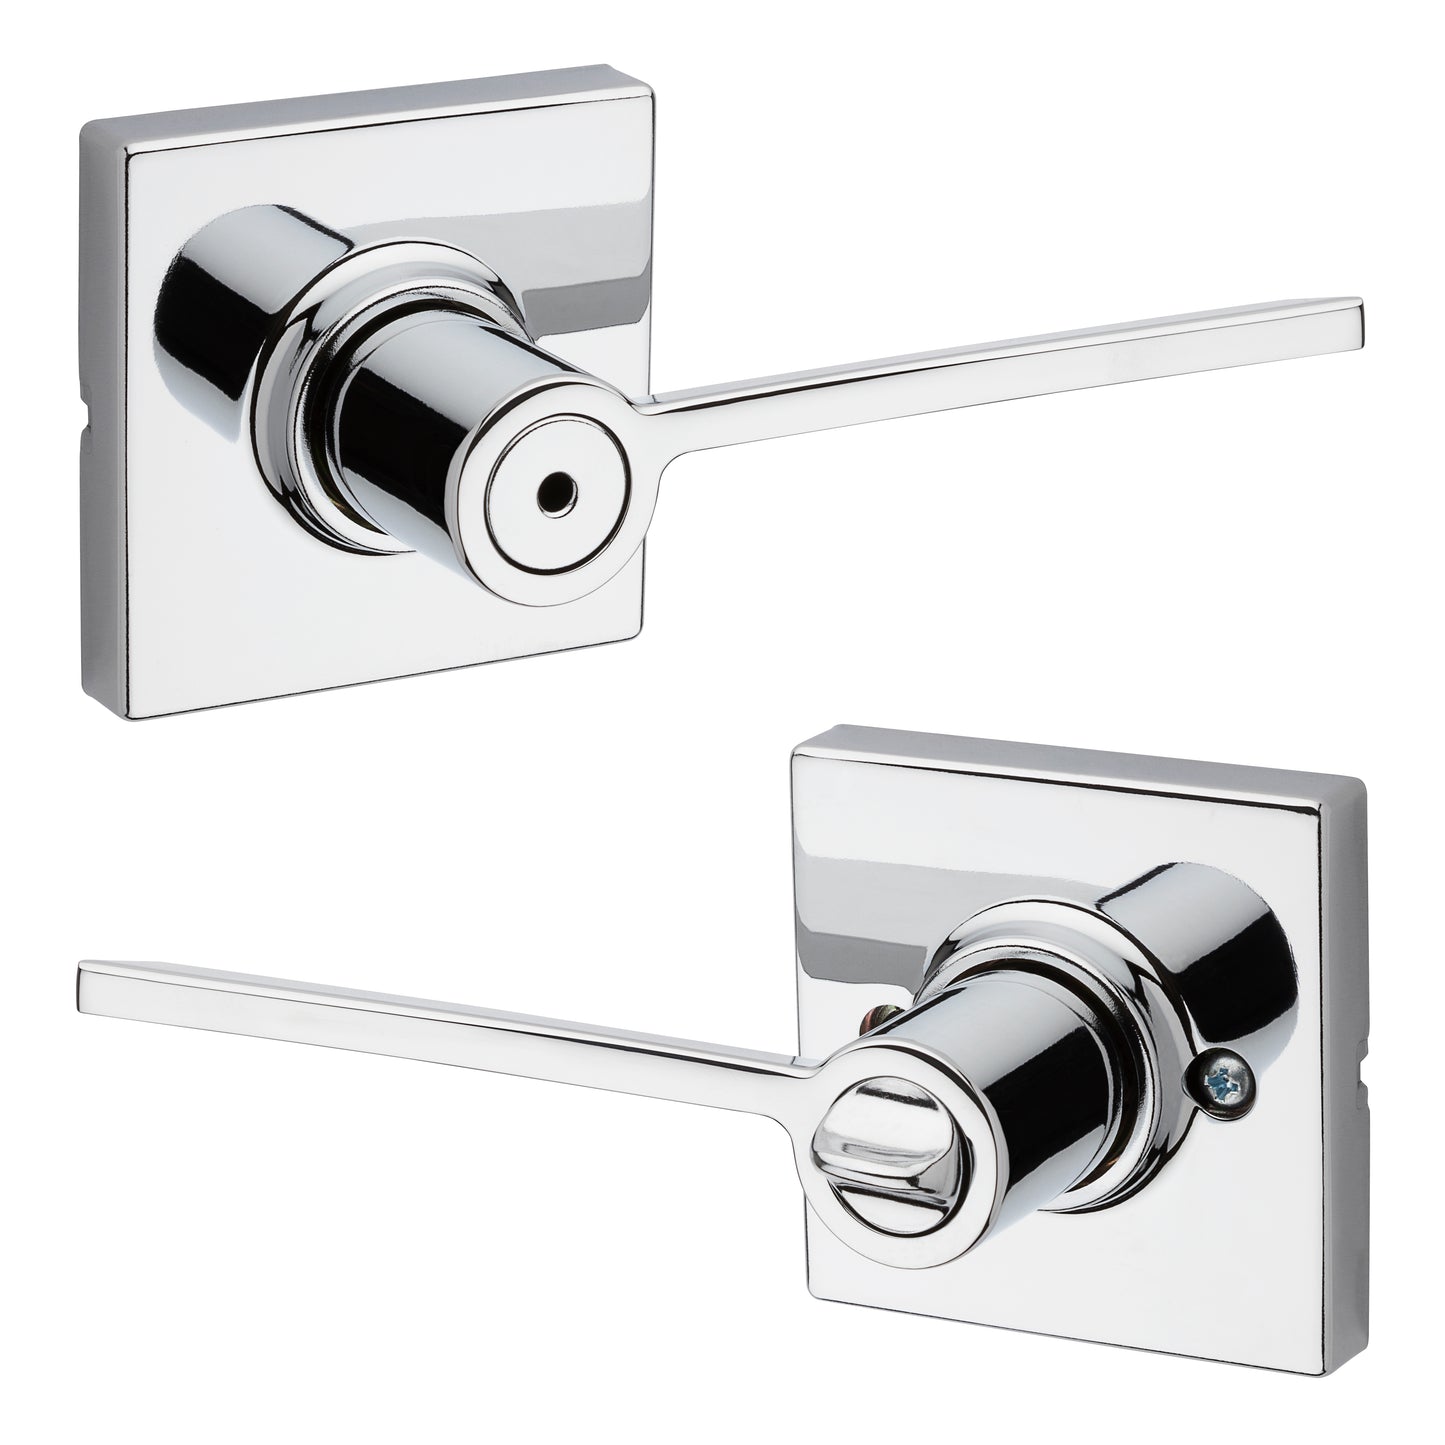 Kwikset 300LRLSQT-26 Ladera Lever with Square Rose Privacy Door Lock with 6AL Latch and RCS Strike Bright Chrome Finish